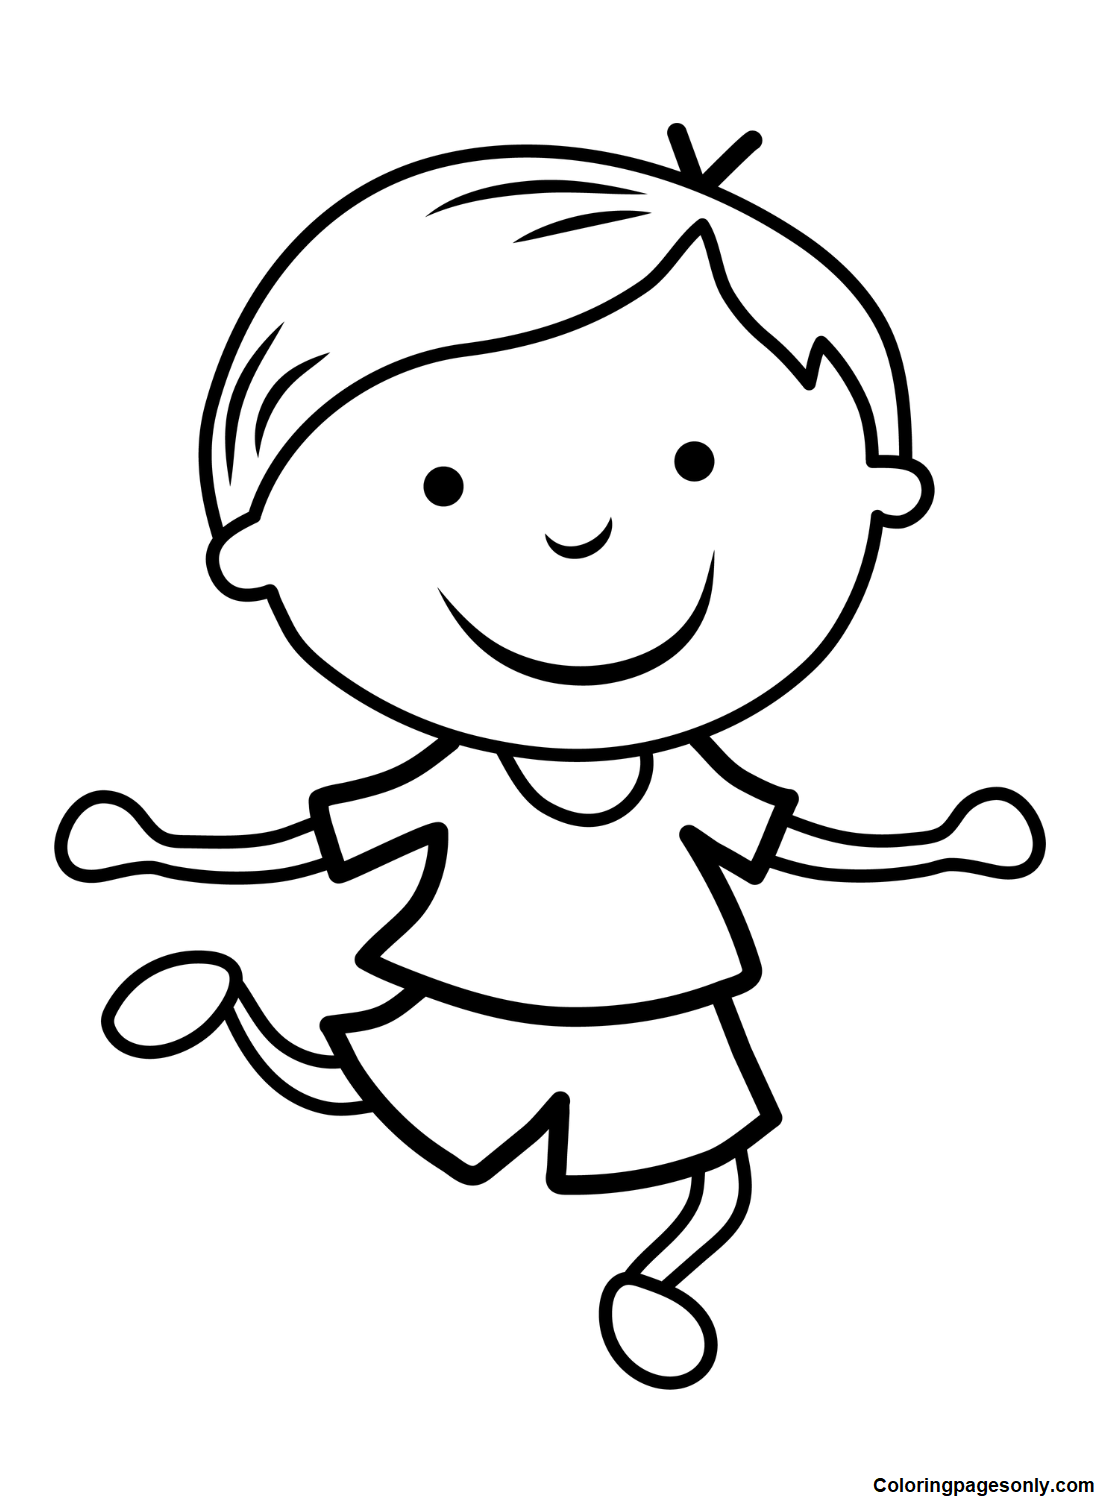 Boyish Coloring Pages Printable for Free Download